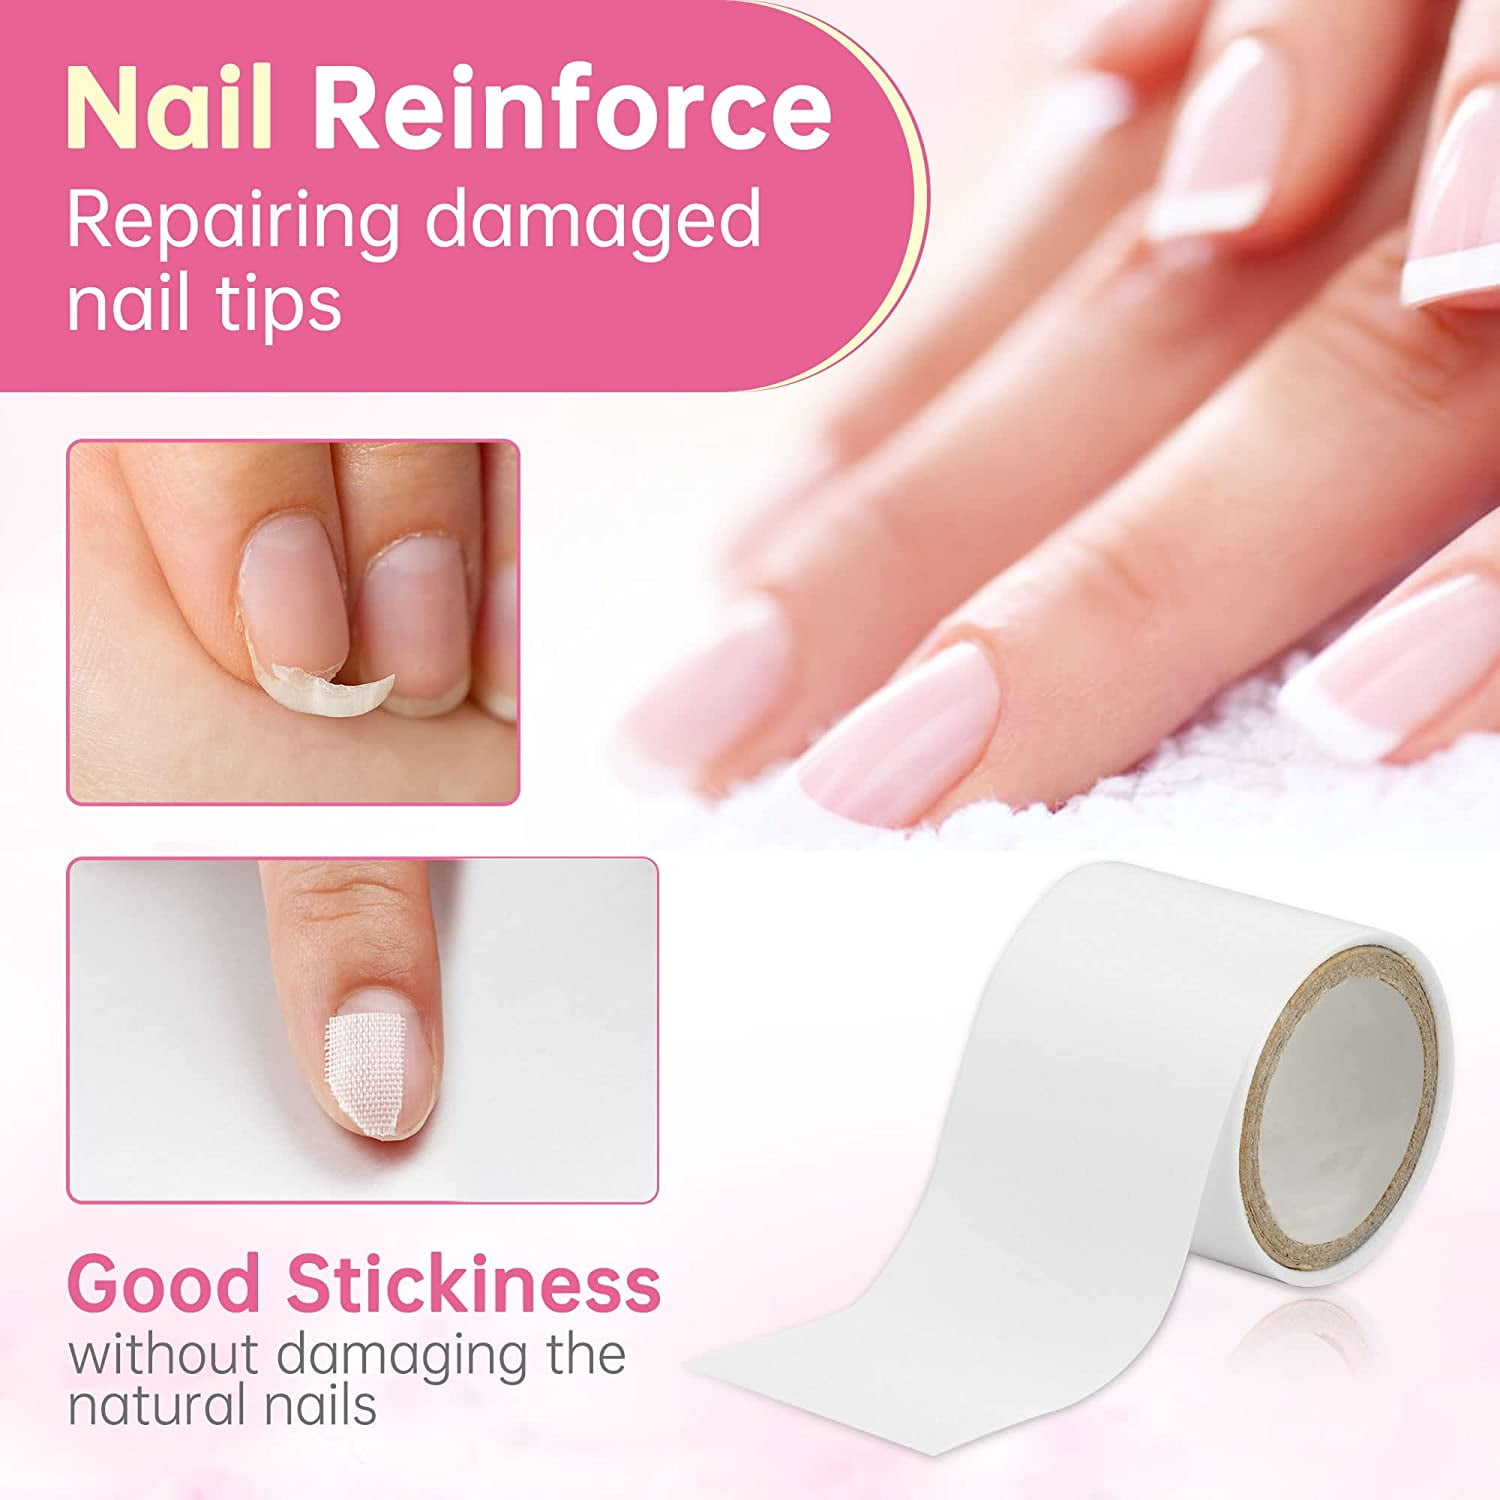 Buy 5ml Instant Cracked Nail Repair Gel, Nail Strengthener, Phototherapy  Glue, Nail Recovery for Restore Weak Nails, Broken Nail, Damaged Nails -  Instantly Fill in and Fix Nail Cracks Flawlessly (1pc) Online at Low Prices  in India - Amazon.in